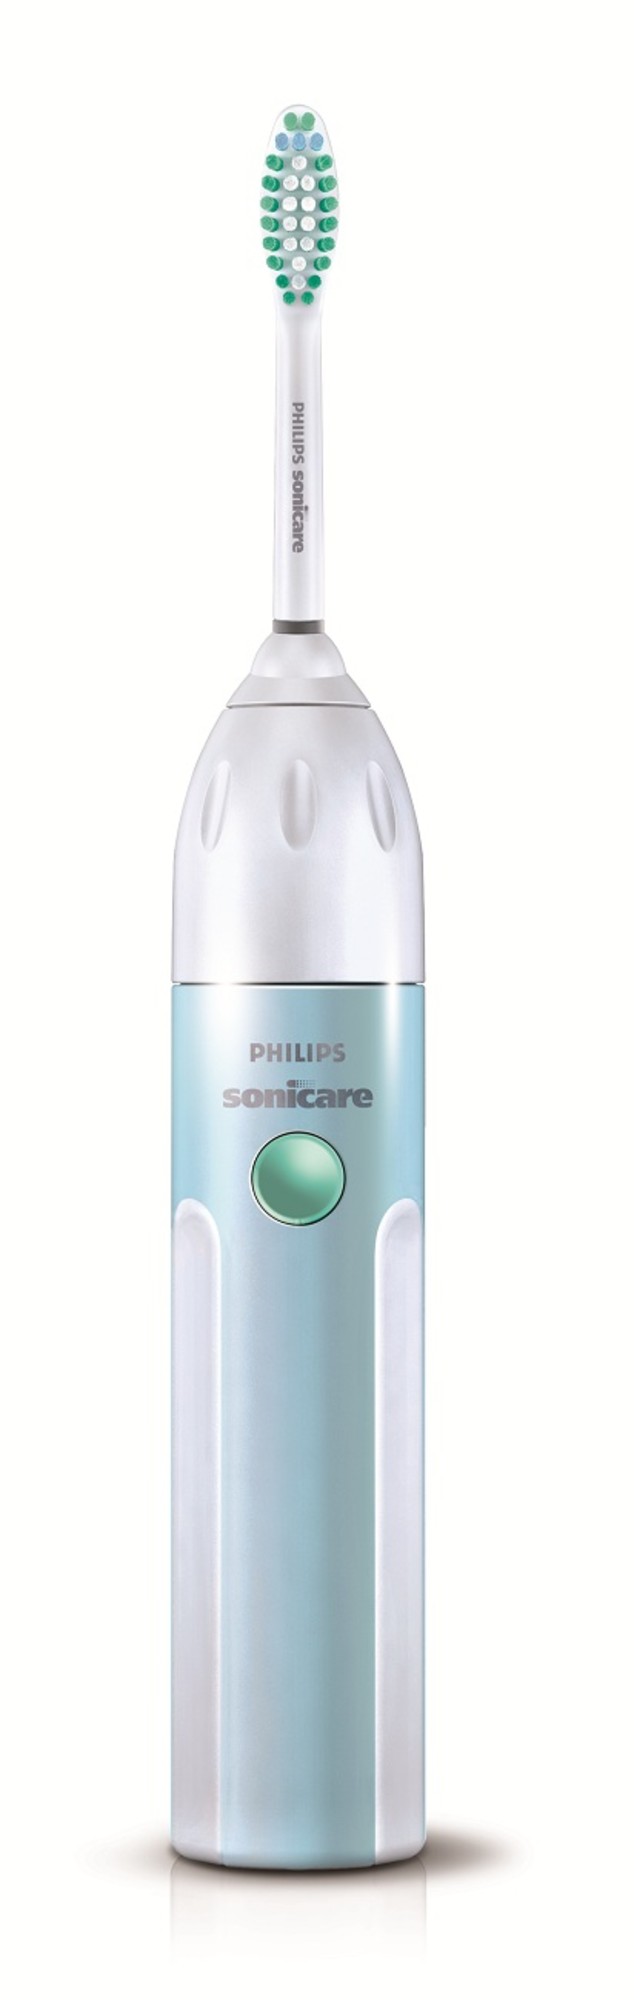 Philips Sonicare Essence Electric Rechargeable Toothbrush - image 1 of 2